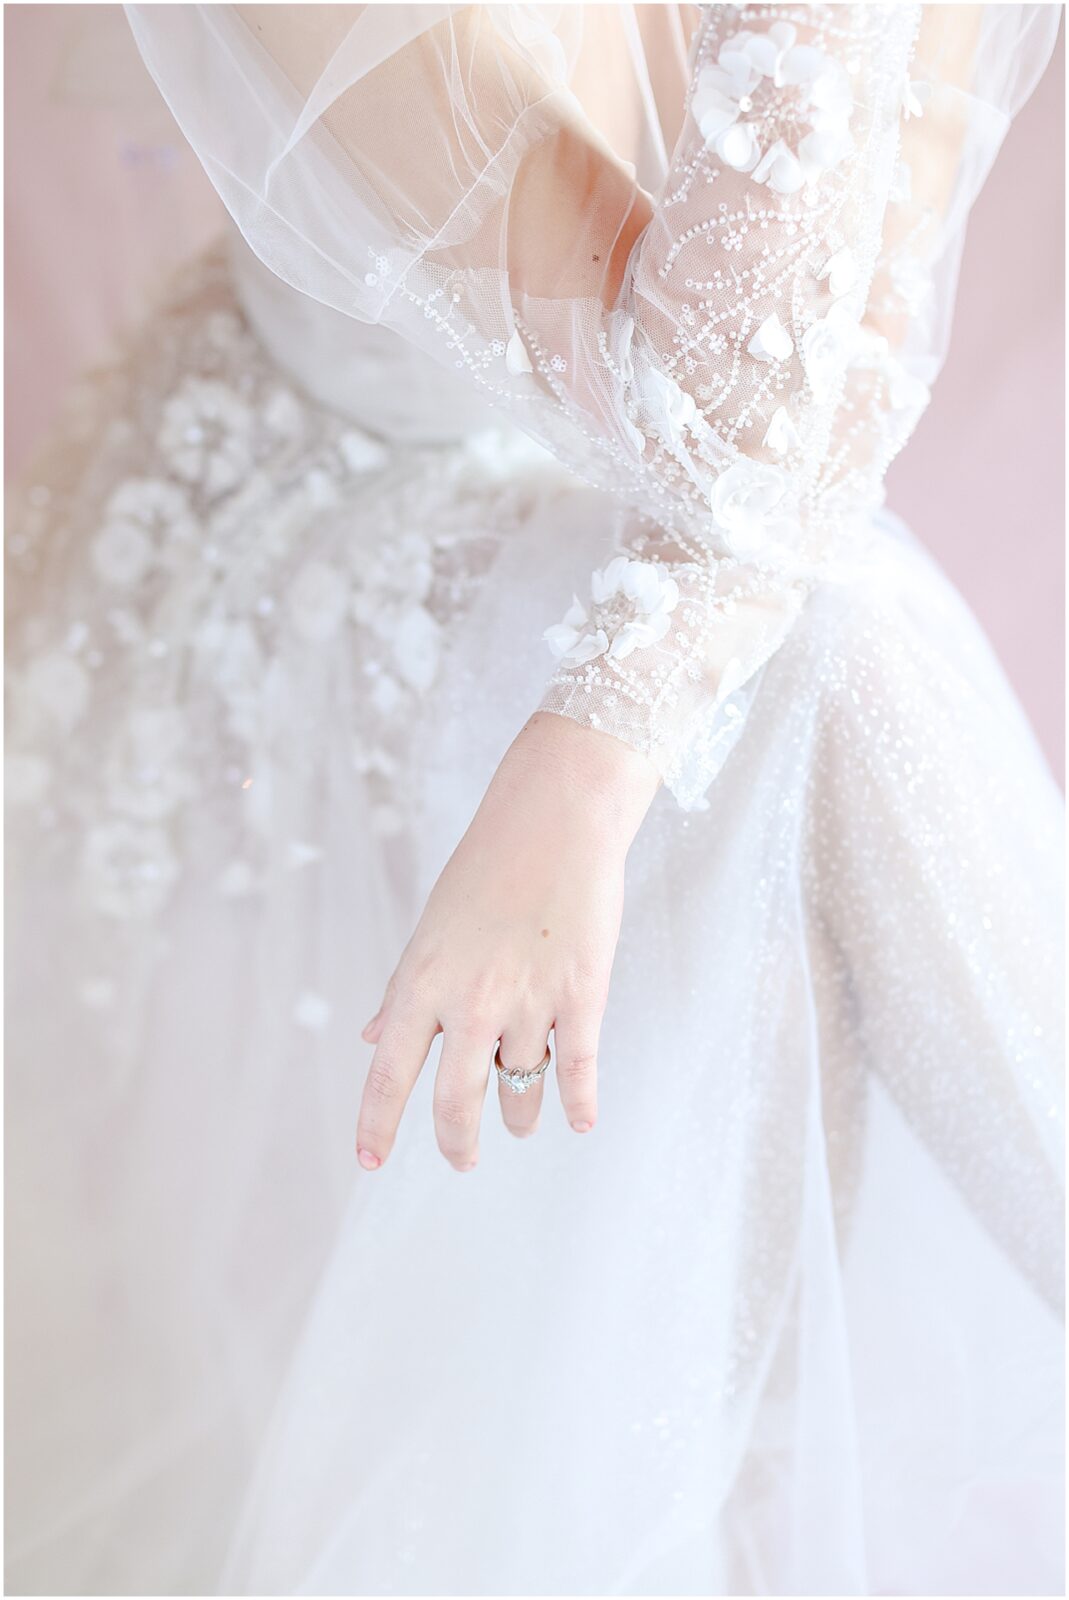 Kansas City Luxury Editorial Wedding Photography | Mariam Saifan Photography | KC Wedding Venue Skyline & Co | Hair & Makeup by White Carpet Bride | Dress by the One Bridal | Luxury Wedding Shoes by Bella Belle Shoes | Beautiful Luxury Wedding Editorial Photos